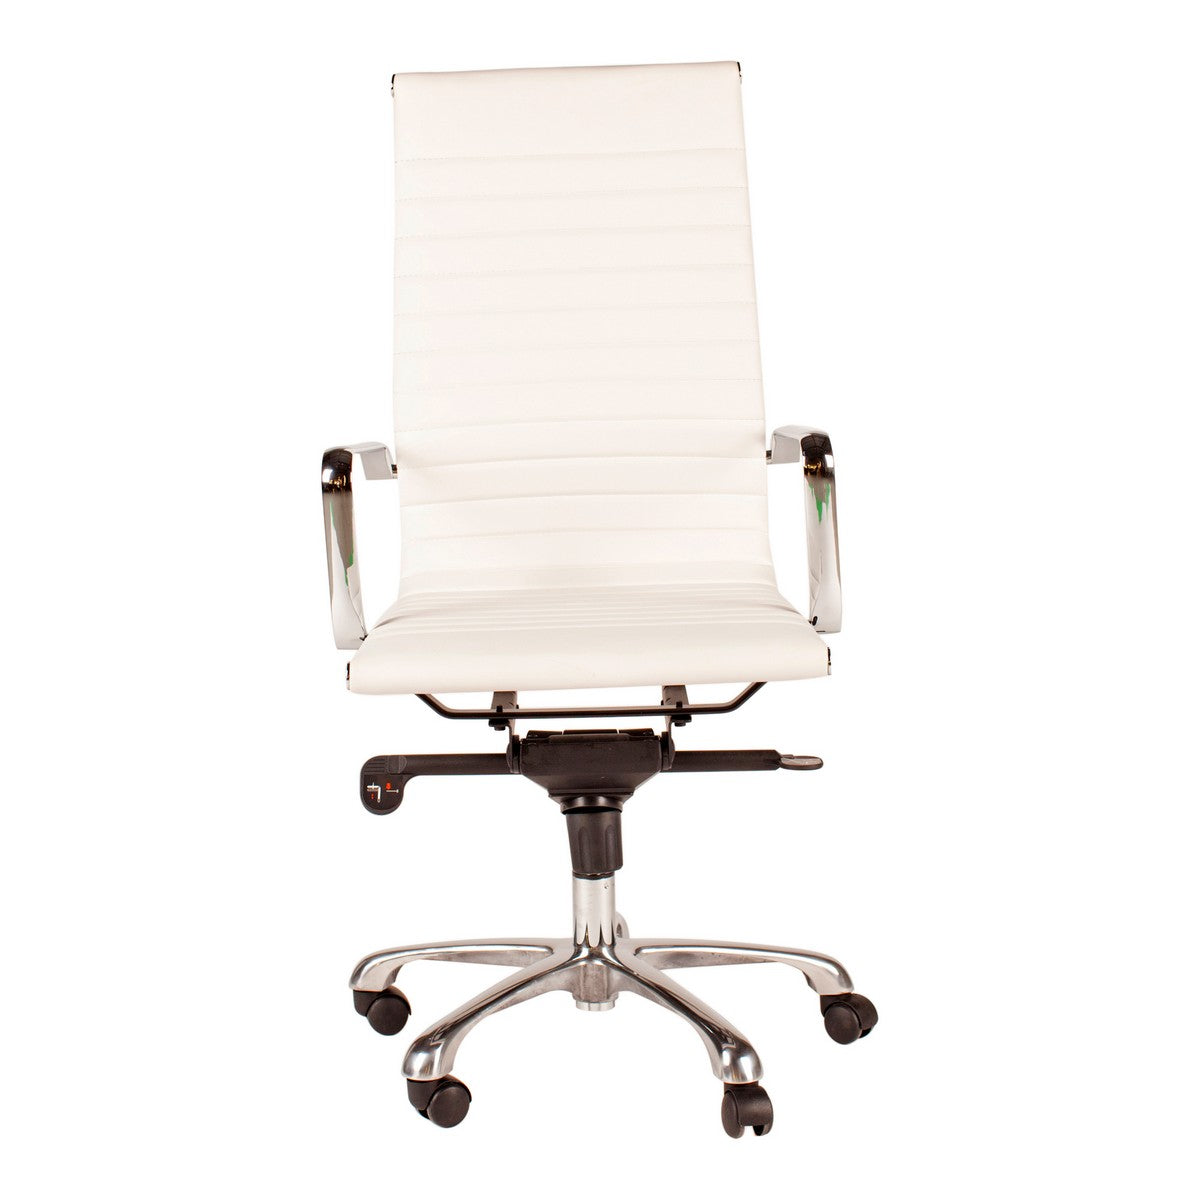 Moe's Home Collection Omega Swivel office Chair High Back White - ZM-1001-18 - Moe's Home Collection - Office Chairs - Minimal And Modern - 1